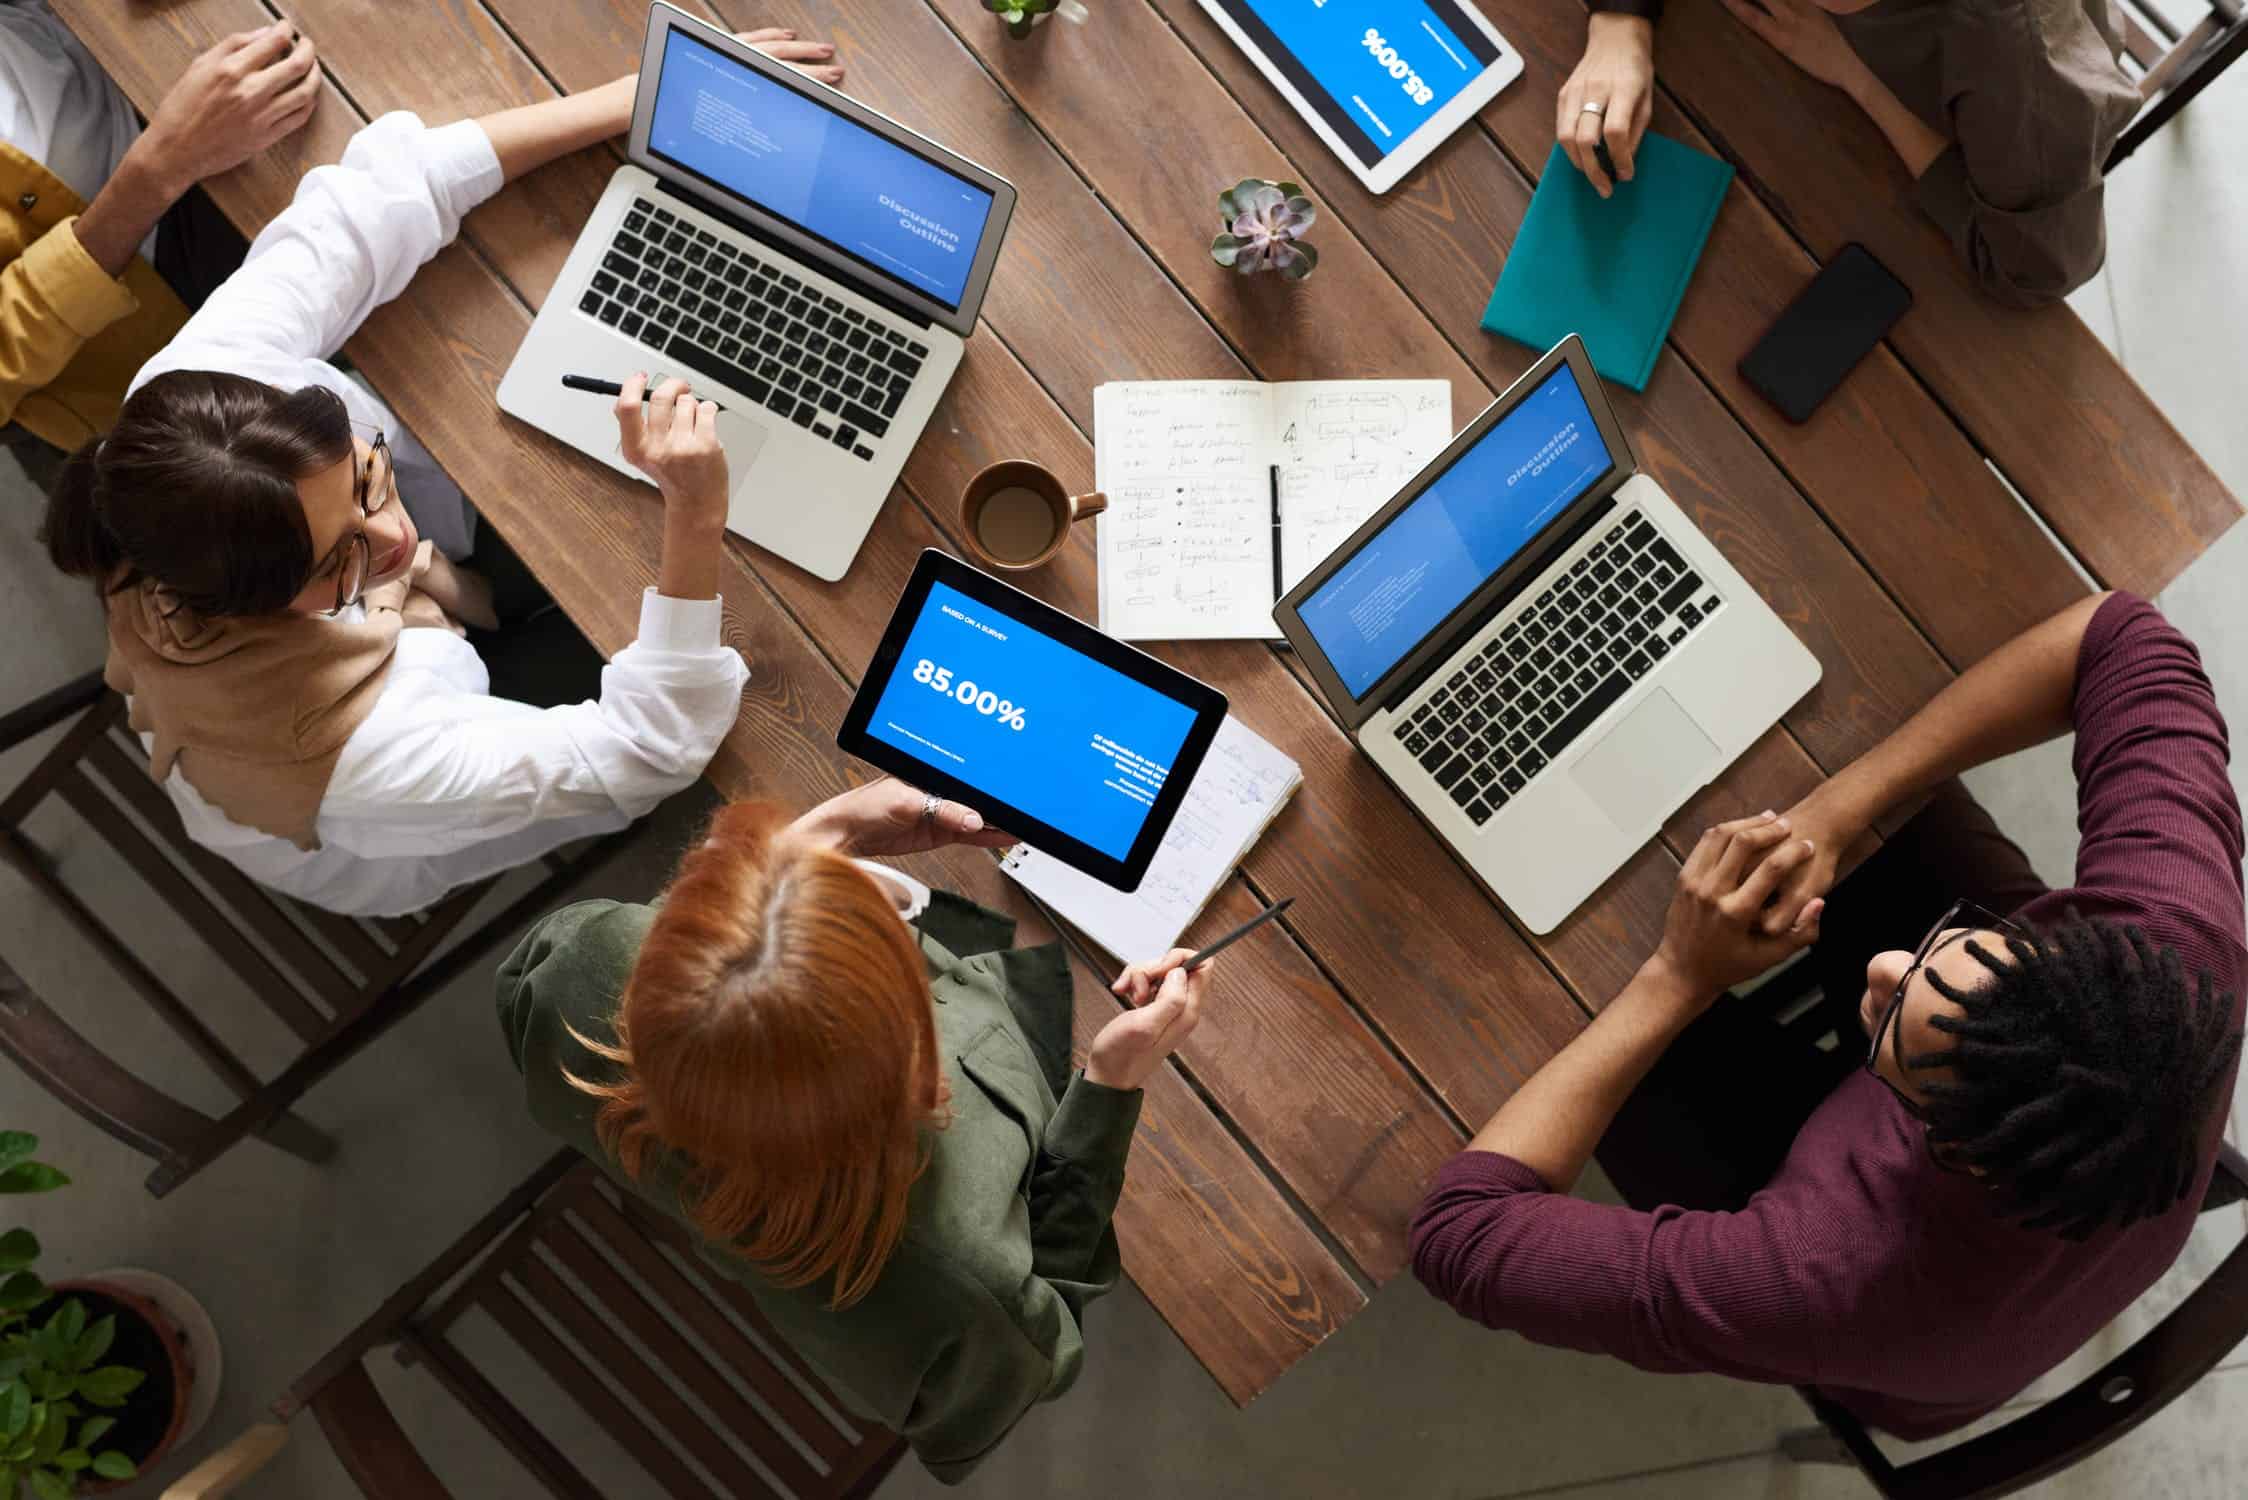 stock image showing a group of corporate employees sitting around a table doing business development